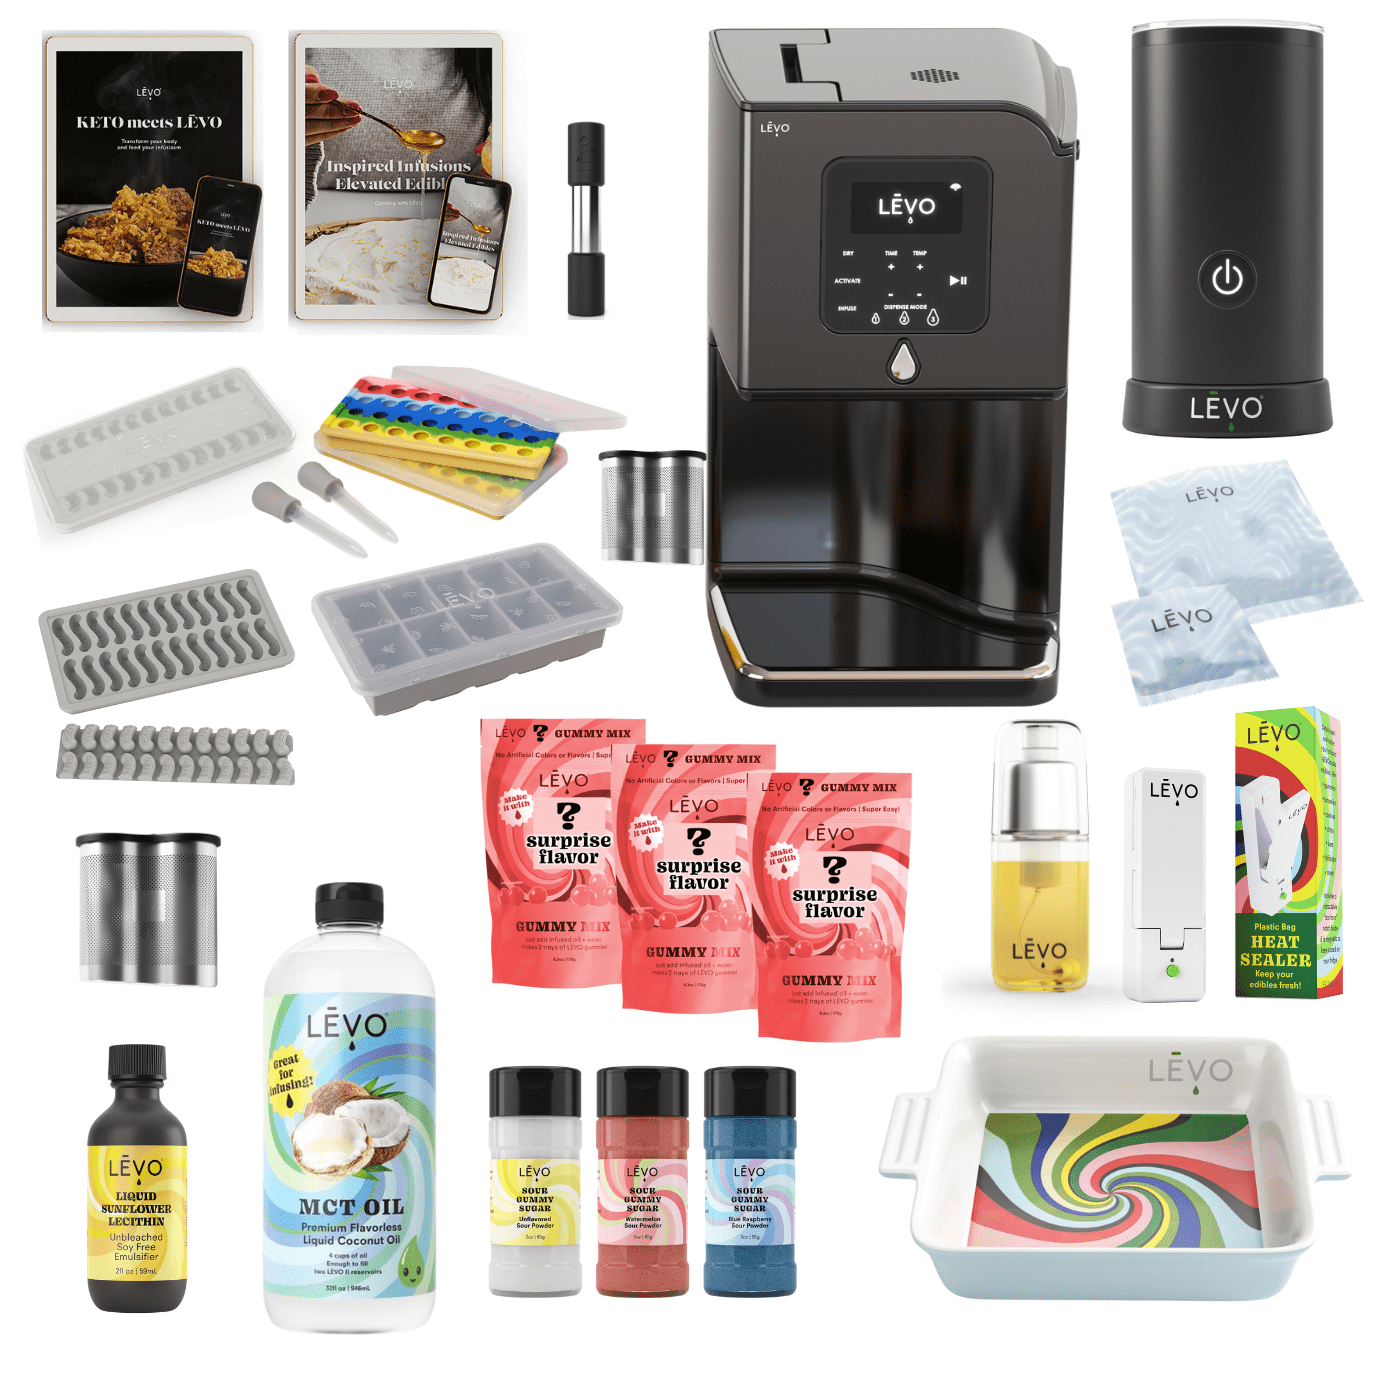 LĒVO Lux Kitchen Sink Bundle with LEVO Gummy Mixer and accessories included.